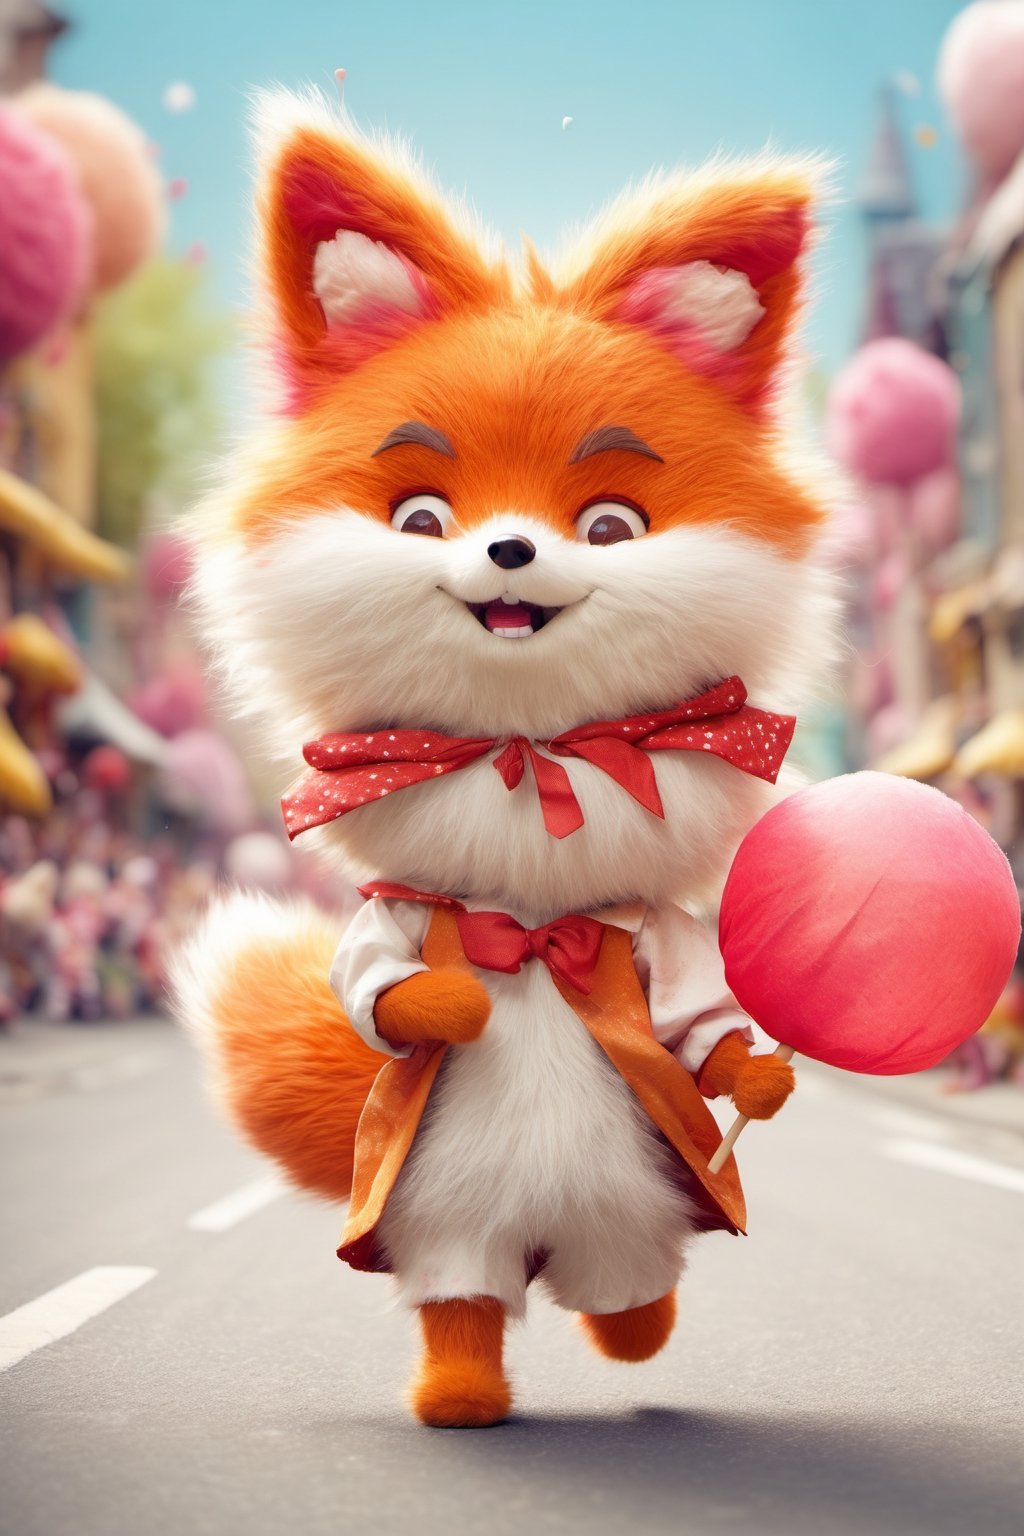 Cute Animals - A cute fluffy fox dressed as a child in a festival running on a street with a large lollipop. Its body is round and soft, with tiny paws and a small, cute face with big, shiny eyes and rosy cheeks. It has a happy face